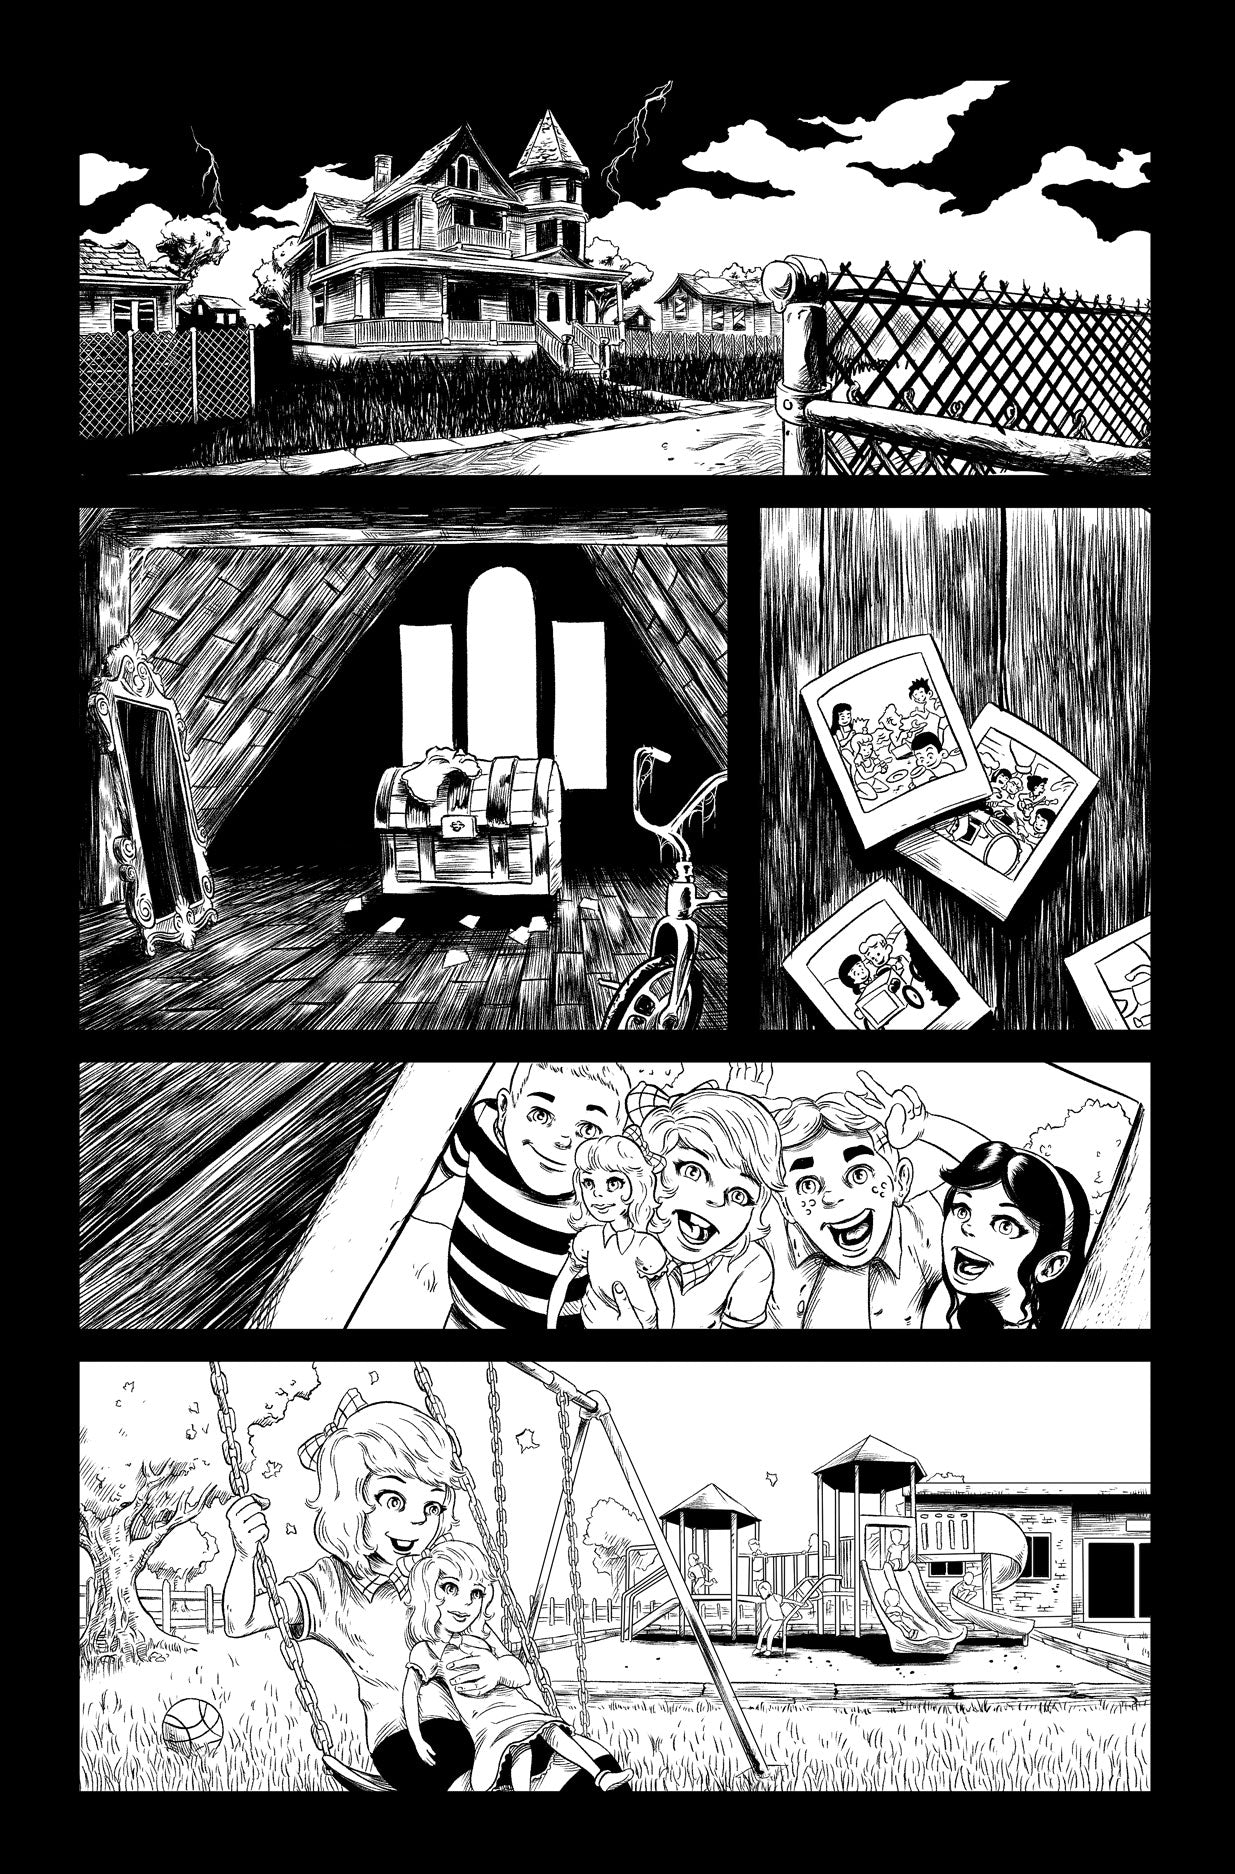 Page 1 of "Love Evernever" from Toybox of Terror. Art by Ryan Caskey.